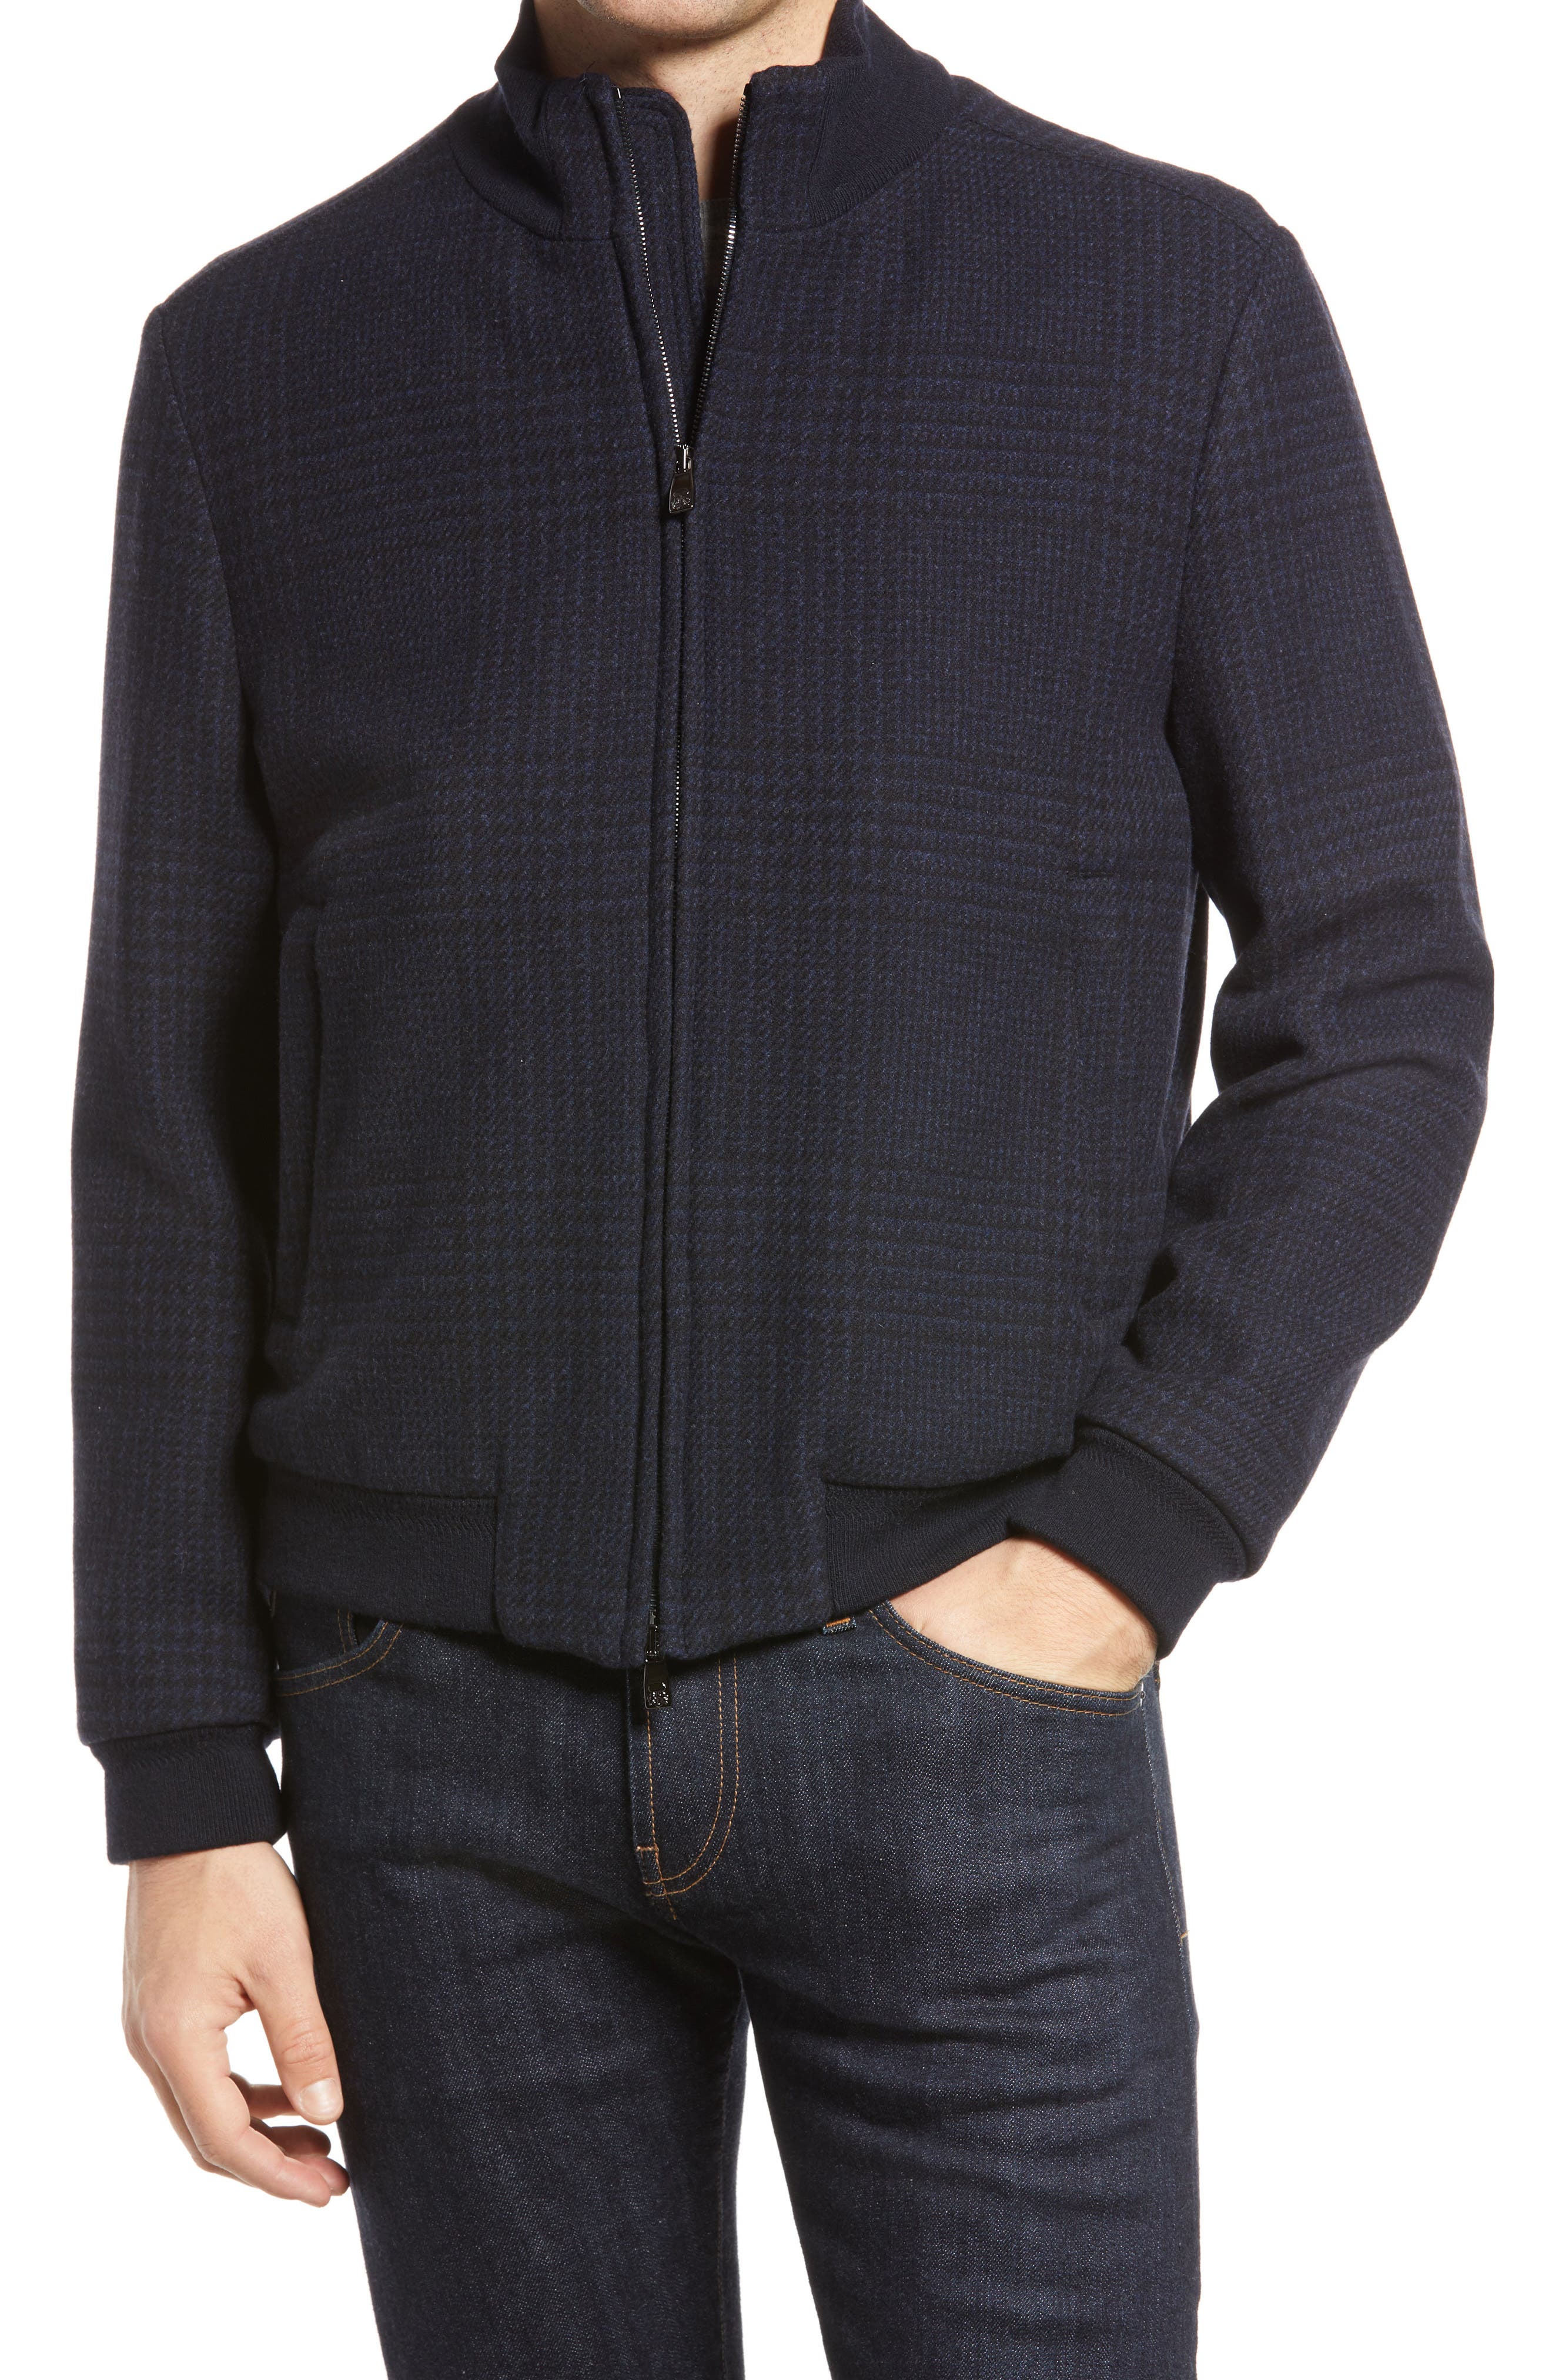 Men's Plaid Wool & Cashmere Jacket - Sale up to 64% Off